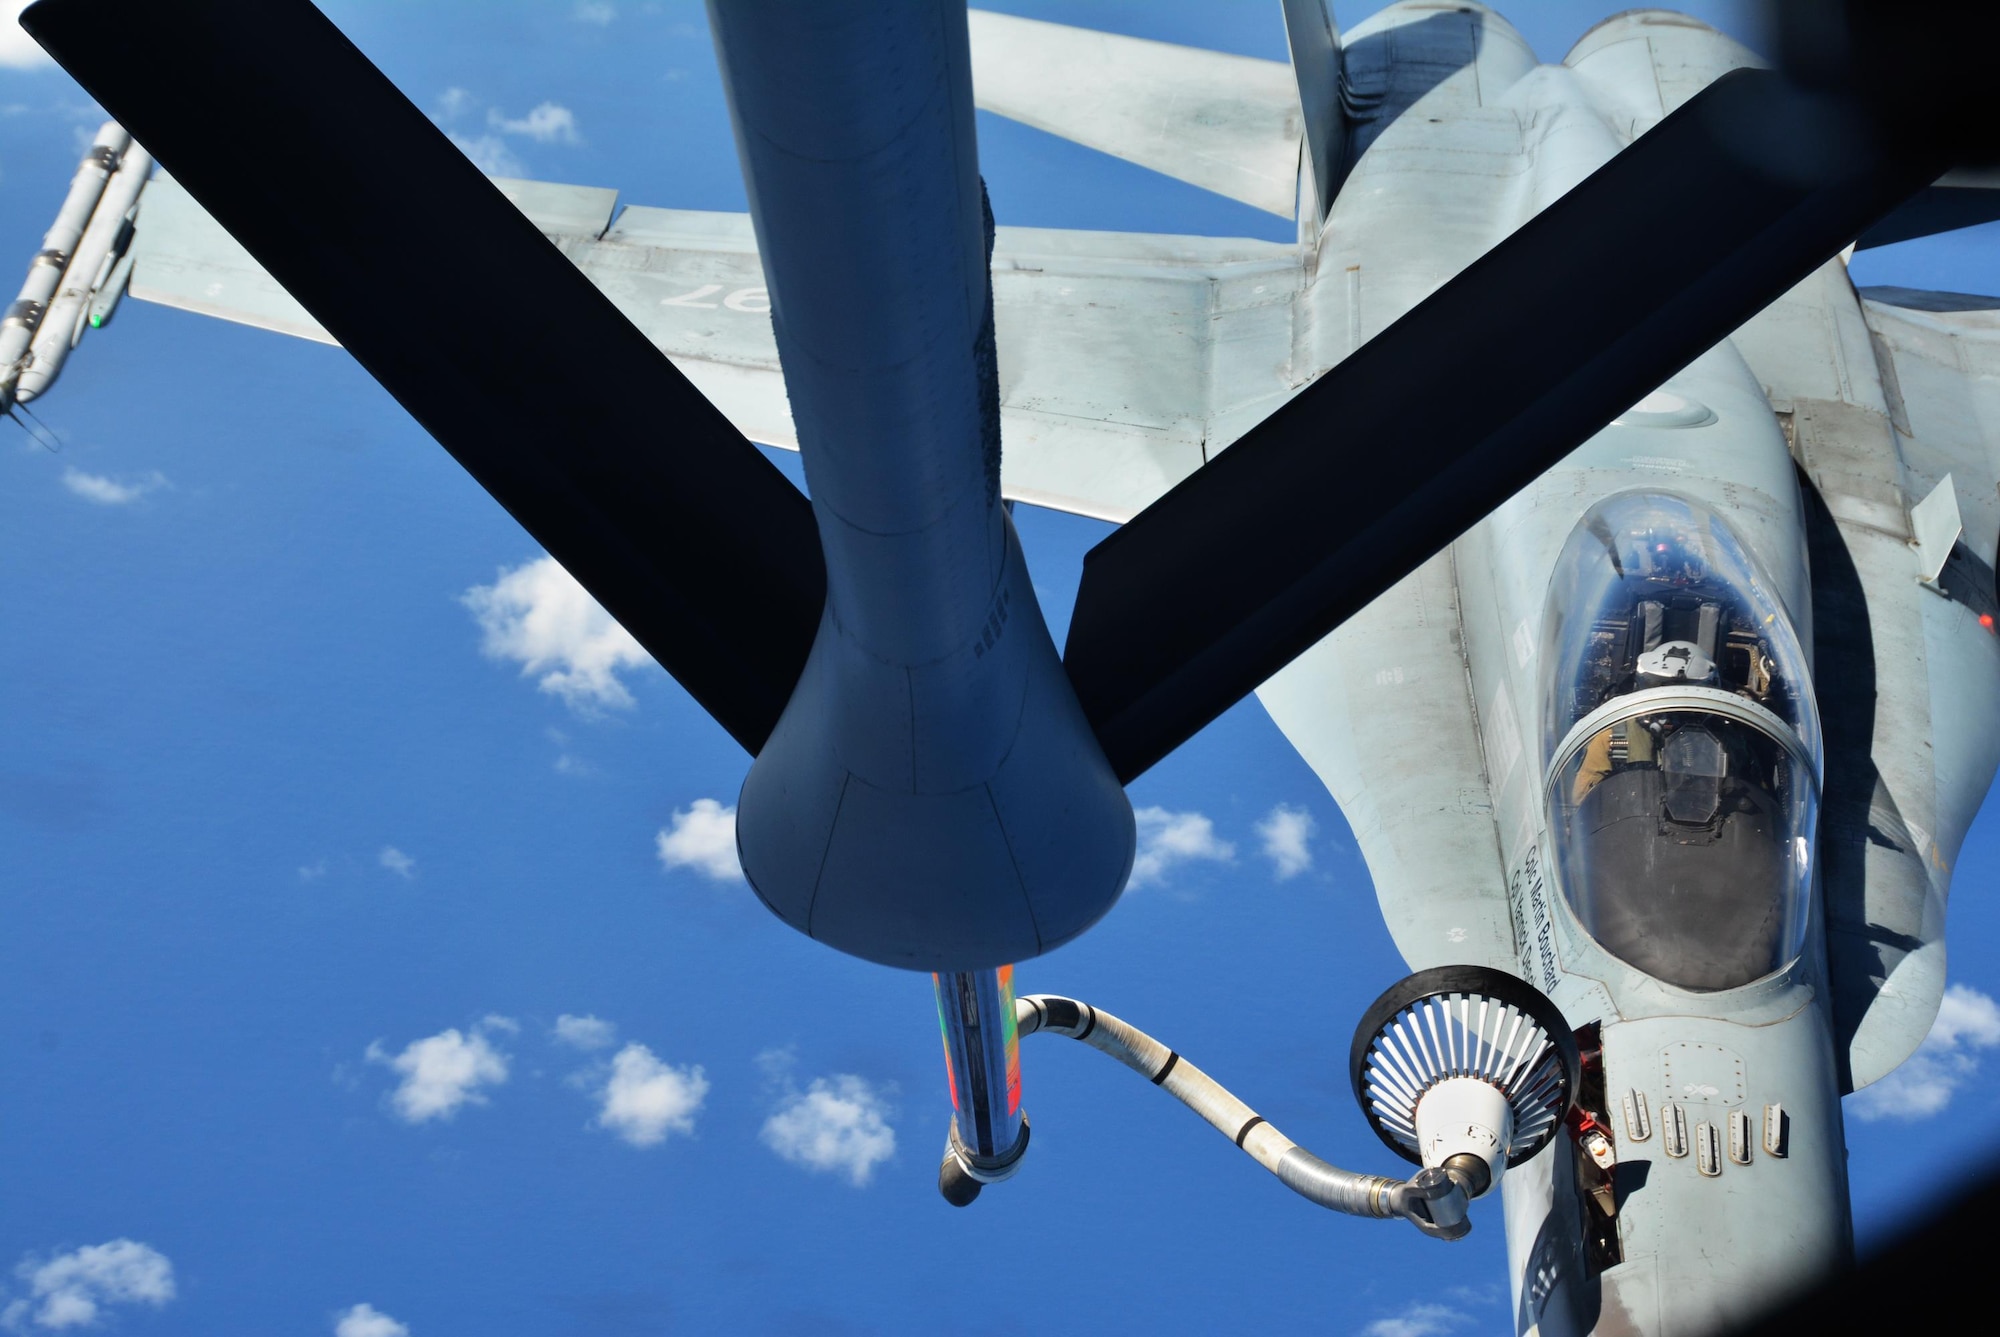 JOINT BASE PEARL HARBOR-HICKAM (July 11, 2016) A KC-135 crew from the 465th Air Refueling Squadron at Tinker Air Force Base, Okla., completes an aerial refueling of a Royal Canadian Air Force CF-18 Hornet July 11, 2016 in support of Rim of the Pacific 2016.  Twenty-six nations, more than 40 ships and submarines, more than 200 aircraft and 25,000 personnel are participating in RIMPAC from June 30 to Aug. 4, in and around the Hawaiian Islands and Southern California. The world's largest international maritime exercise, RIMPAC provides a unique training opportunity that helps participants foster and sustain the cooperative relationships that are critical to ensuring the safety of sea lanes and security on the world's oceans. RIMPAC 2016 is the 25th exercise in the series that began in 1971. (U.S. Air Force photo/Master Sgt. Grady Epperly)